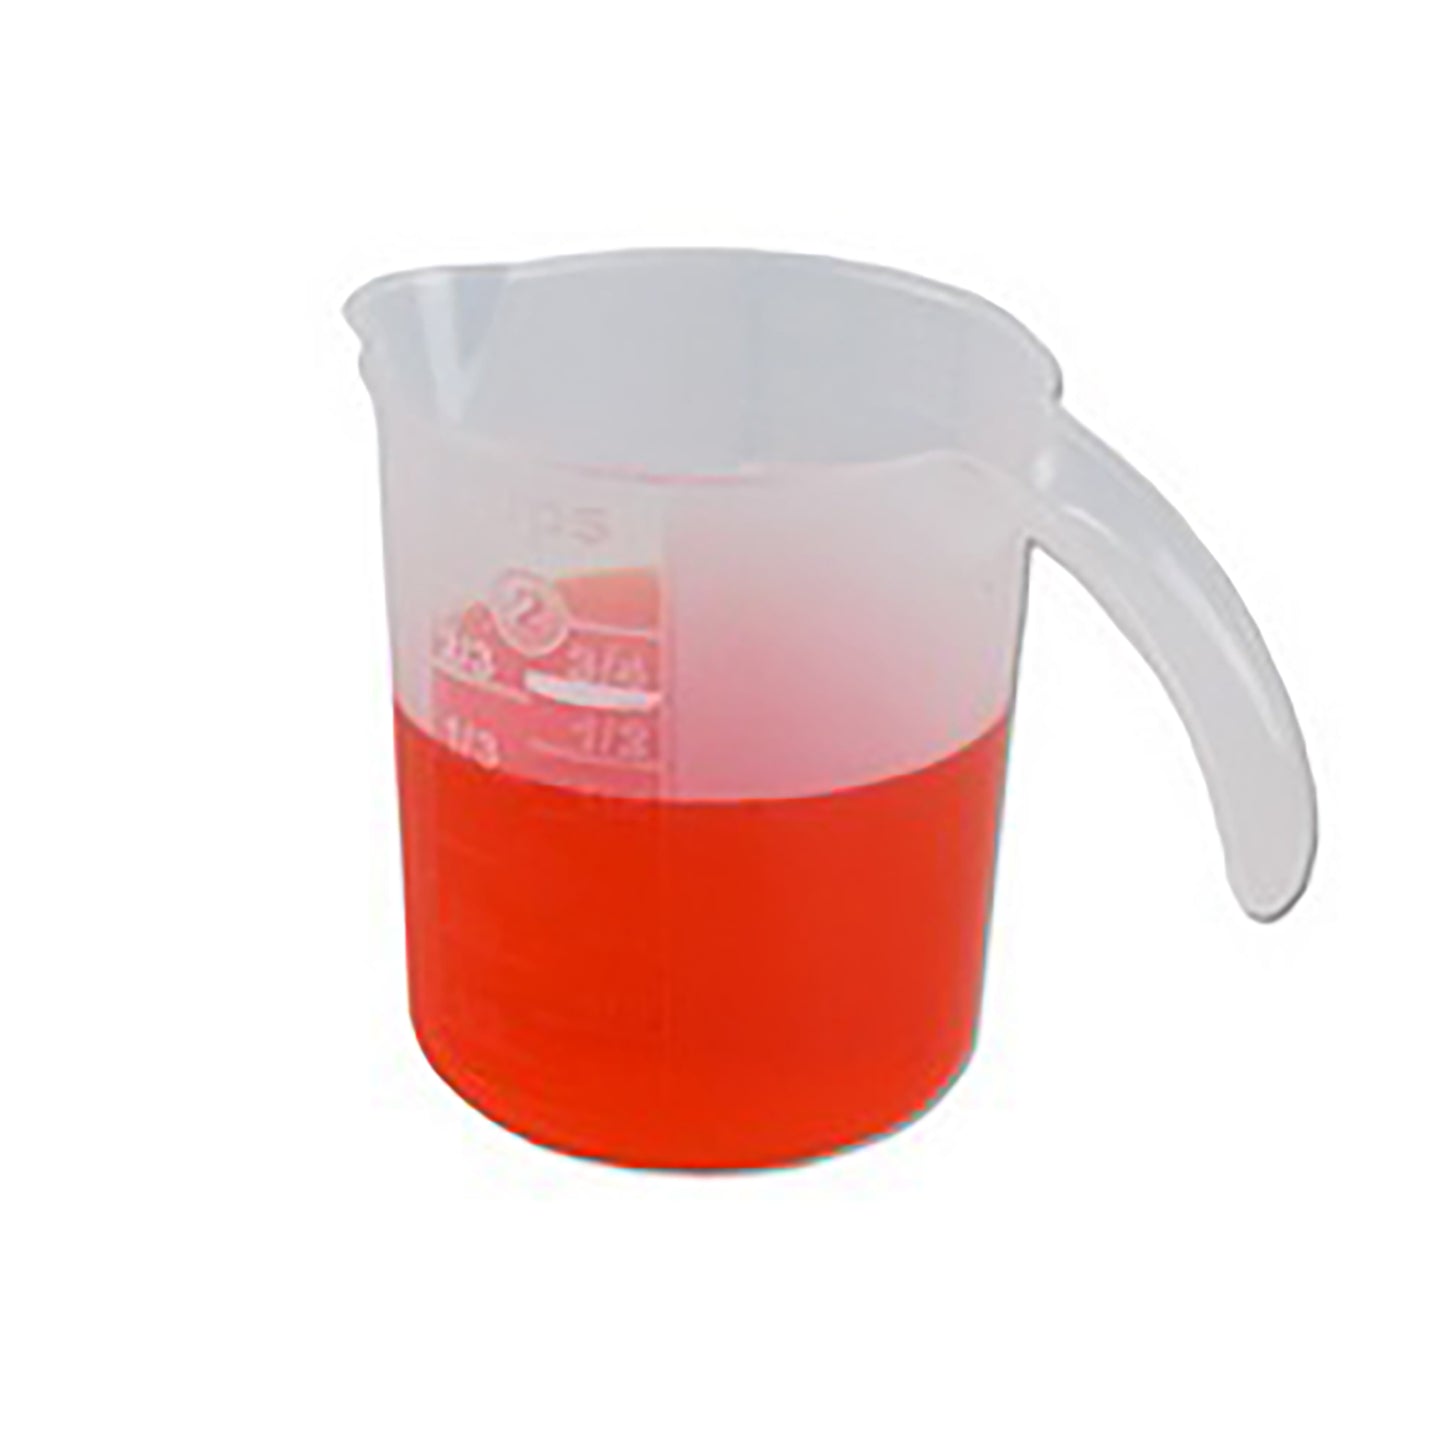 MEASURING CUP (2 CUP)